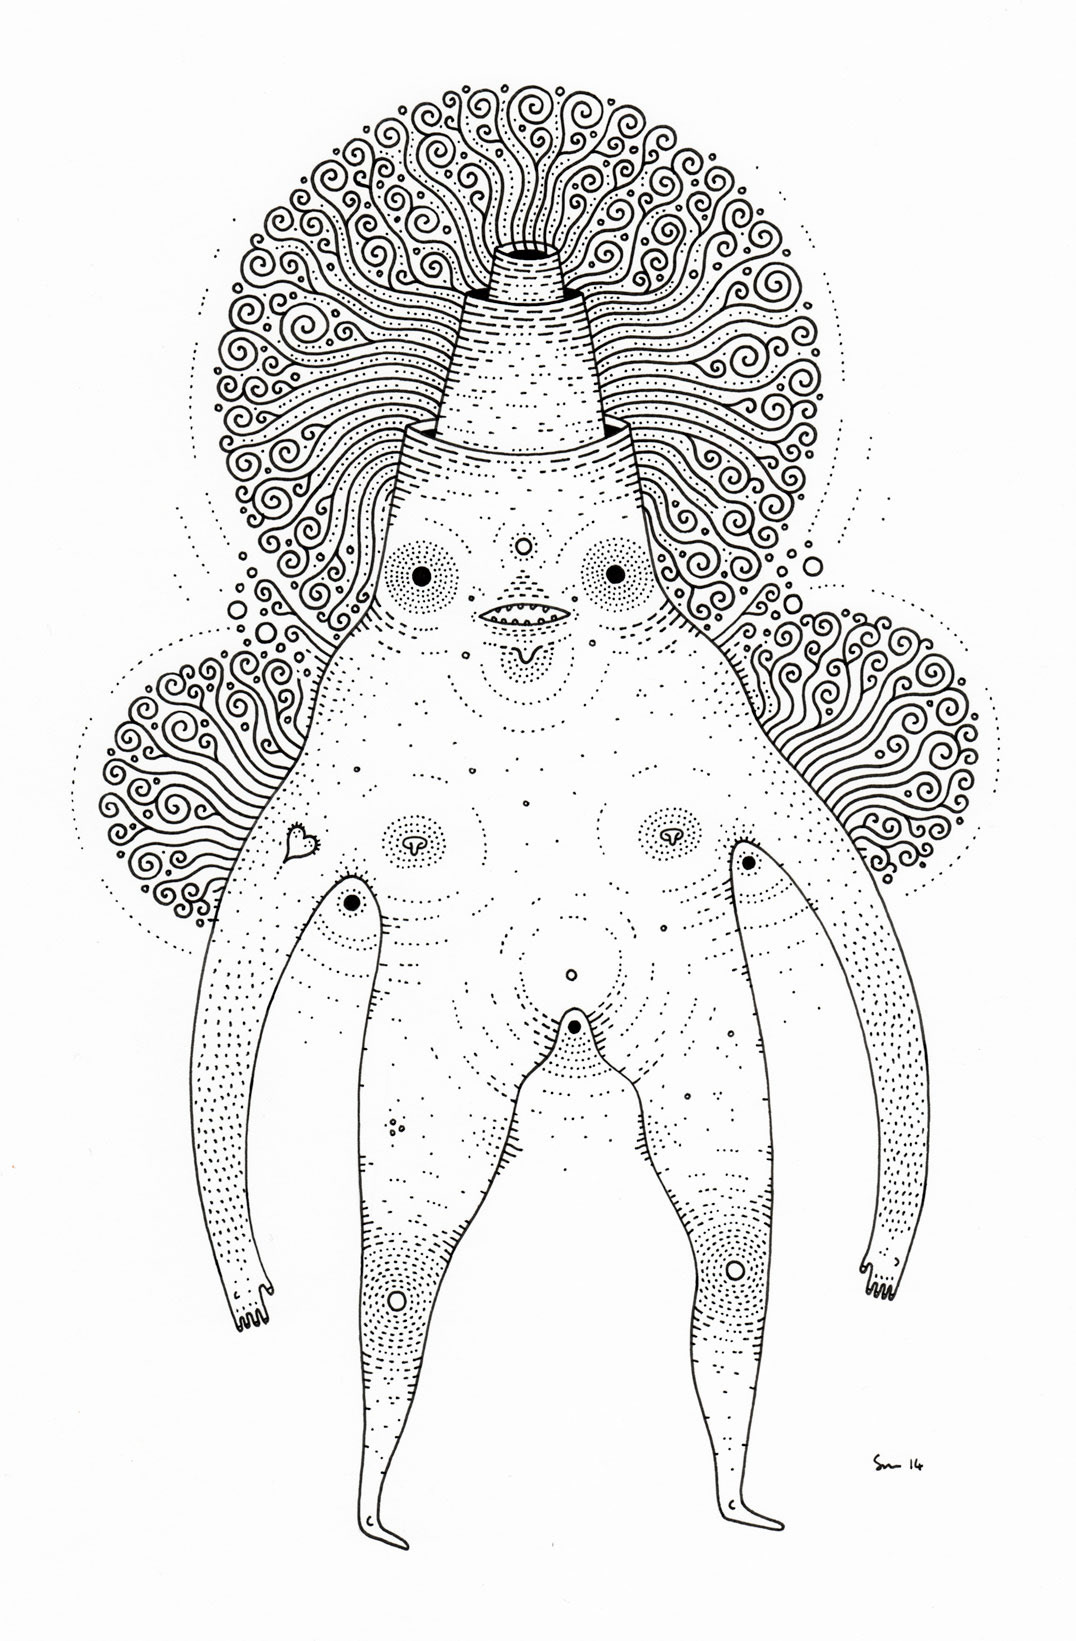 cosmic nuggets draw pens Pencil drawing graphics design characters Love frills Nature biology evolution